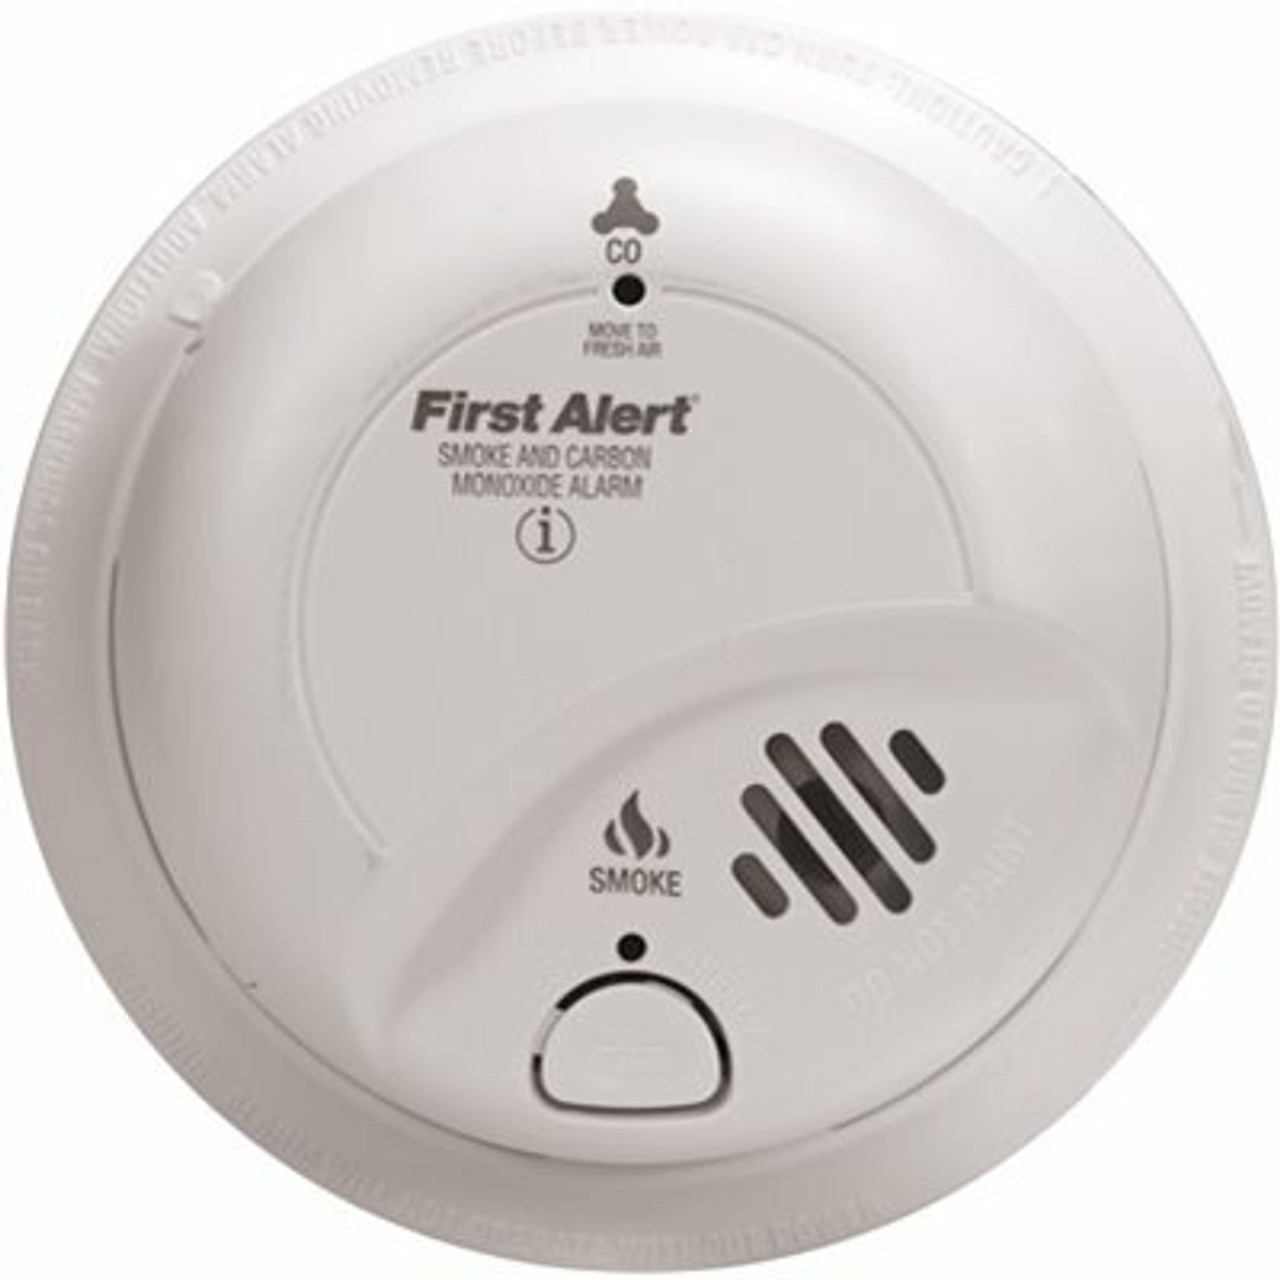 First Alert Combination Smoke And Carbon Monoxide Alarm With 9-Volt Battery